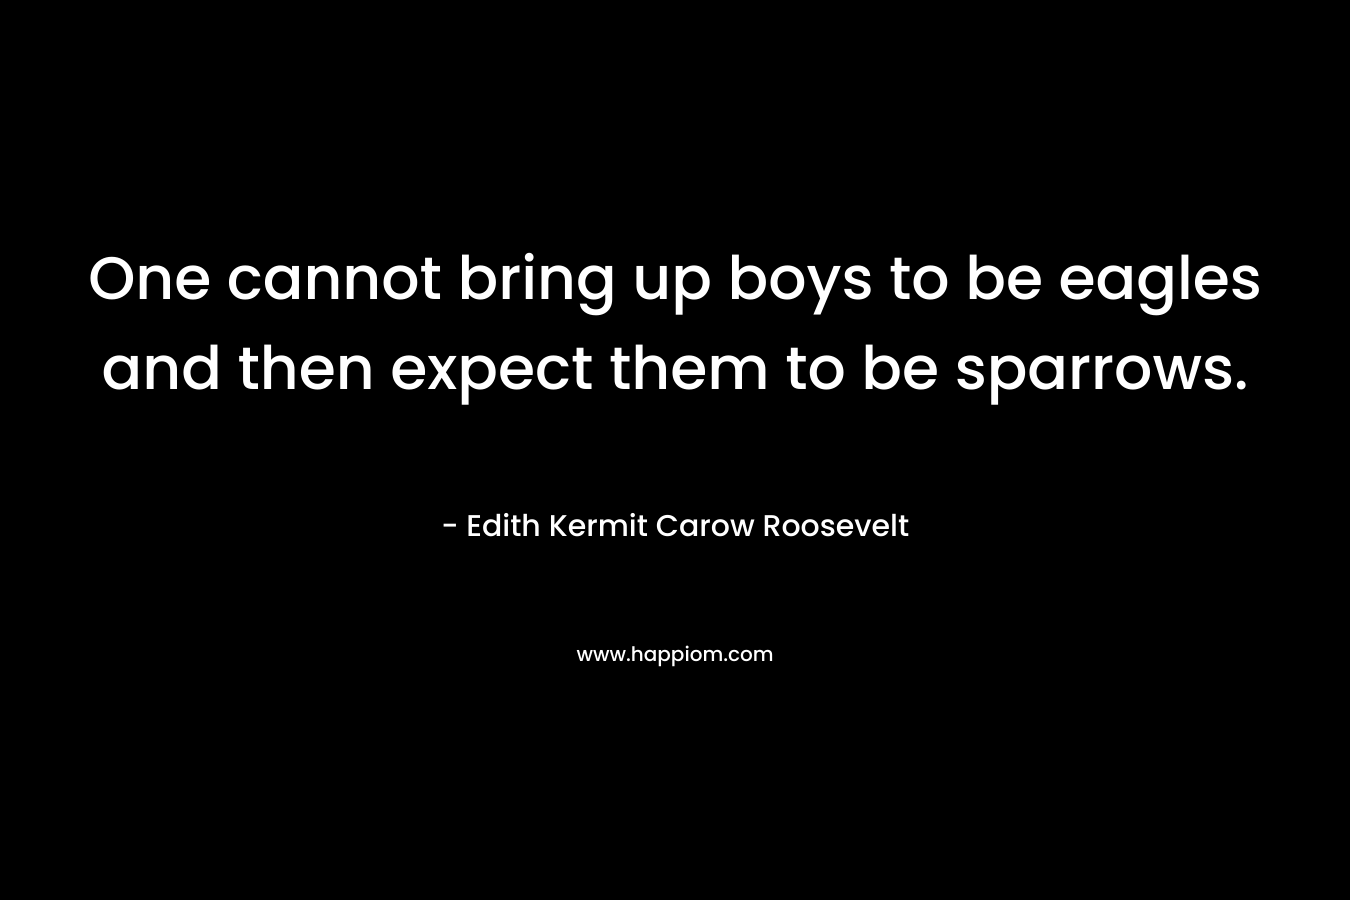 One cannot bring up boys to be eagles and then expect them to be sparrows.